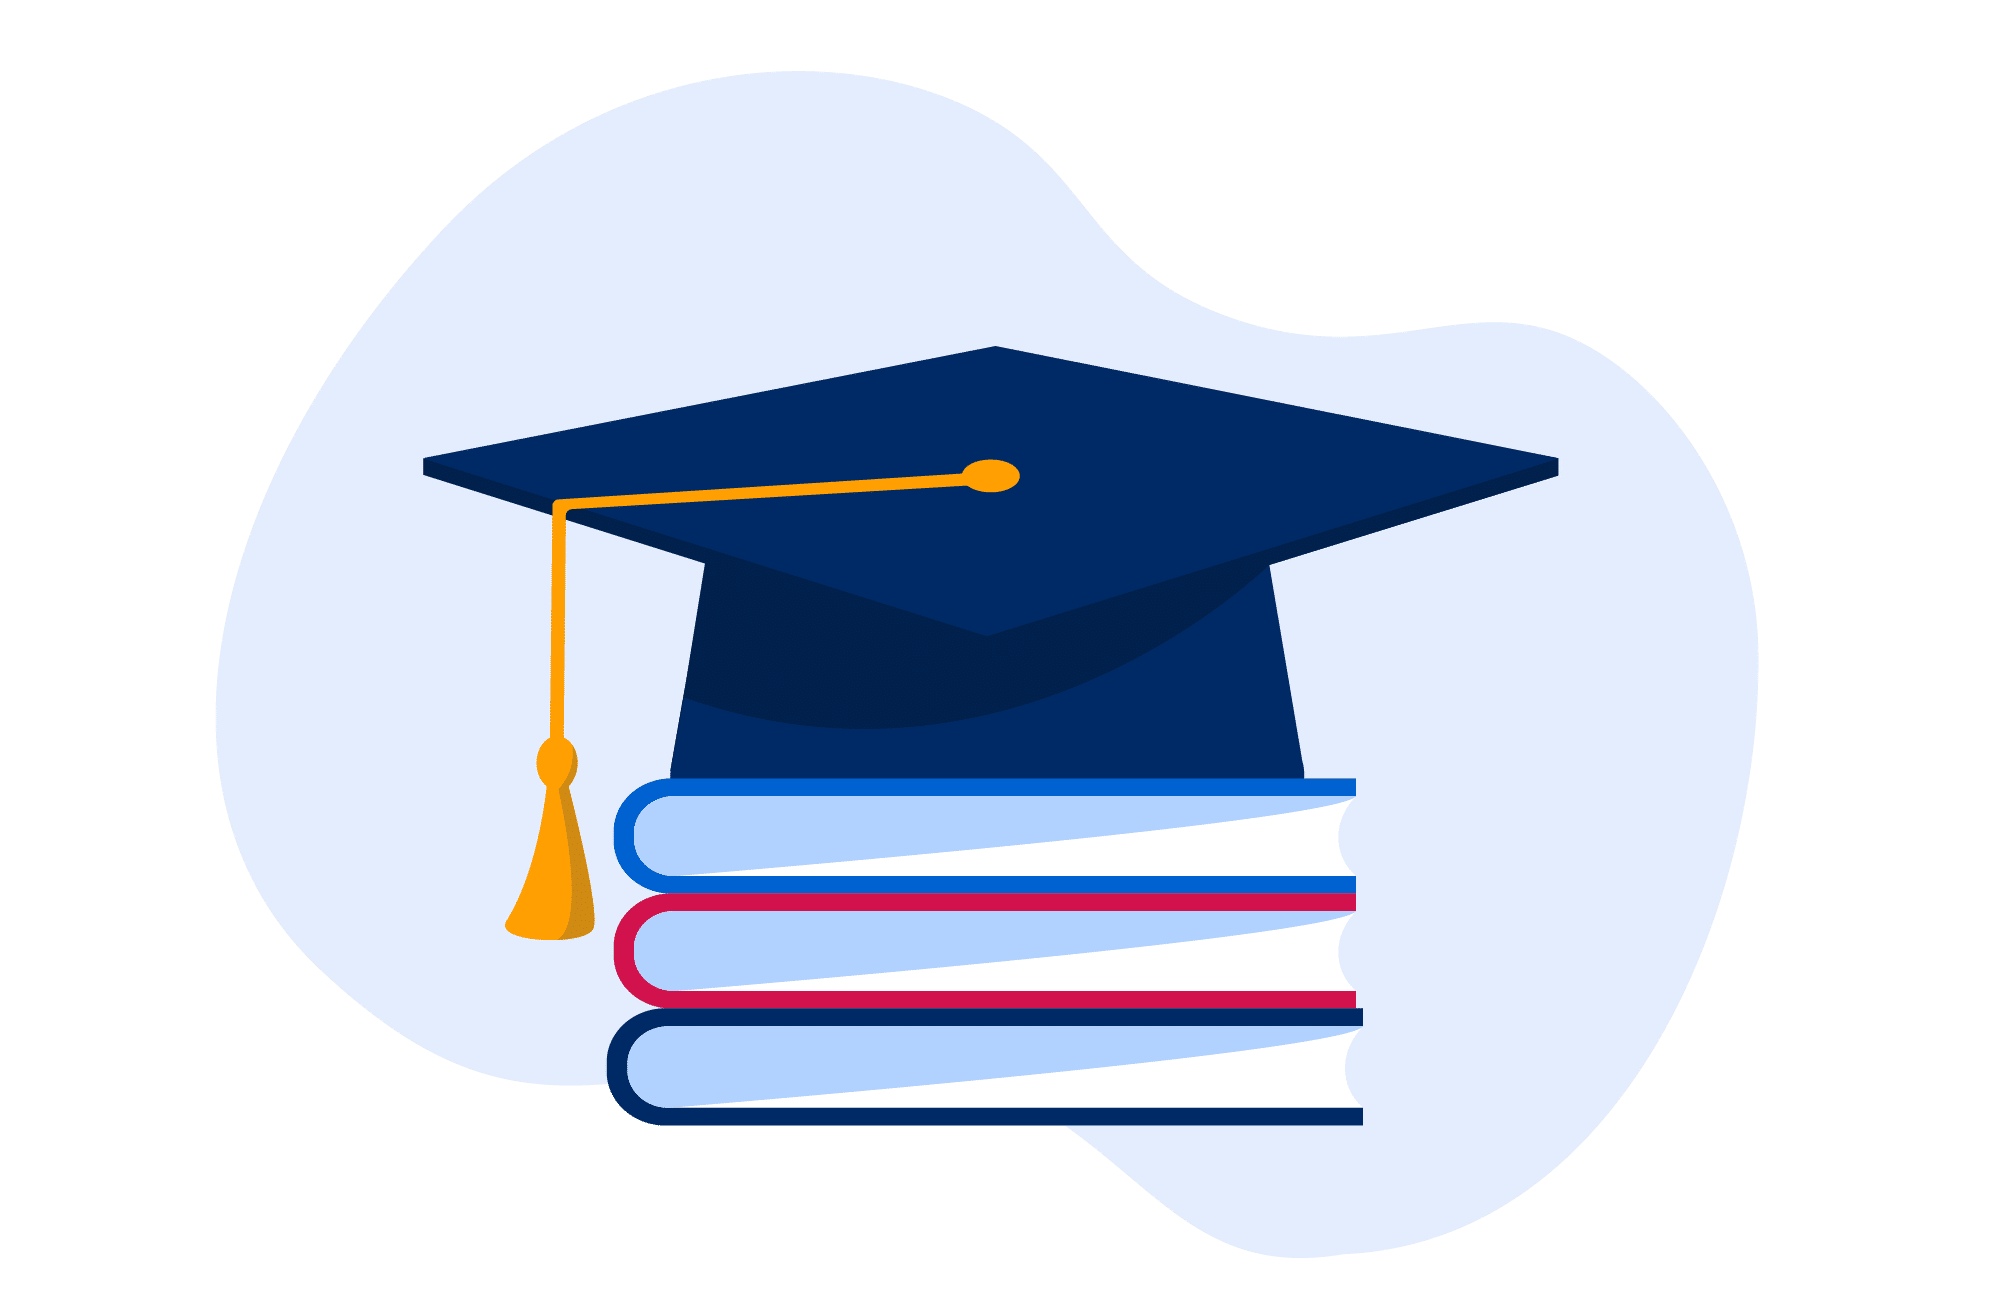 Illustration of a graduation cap on top of a stack of books